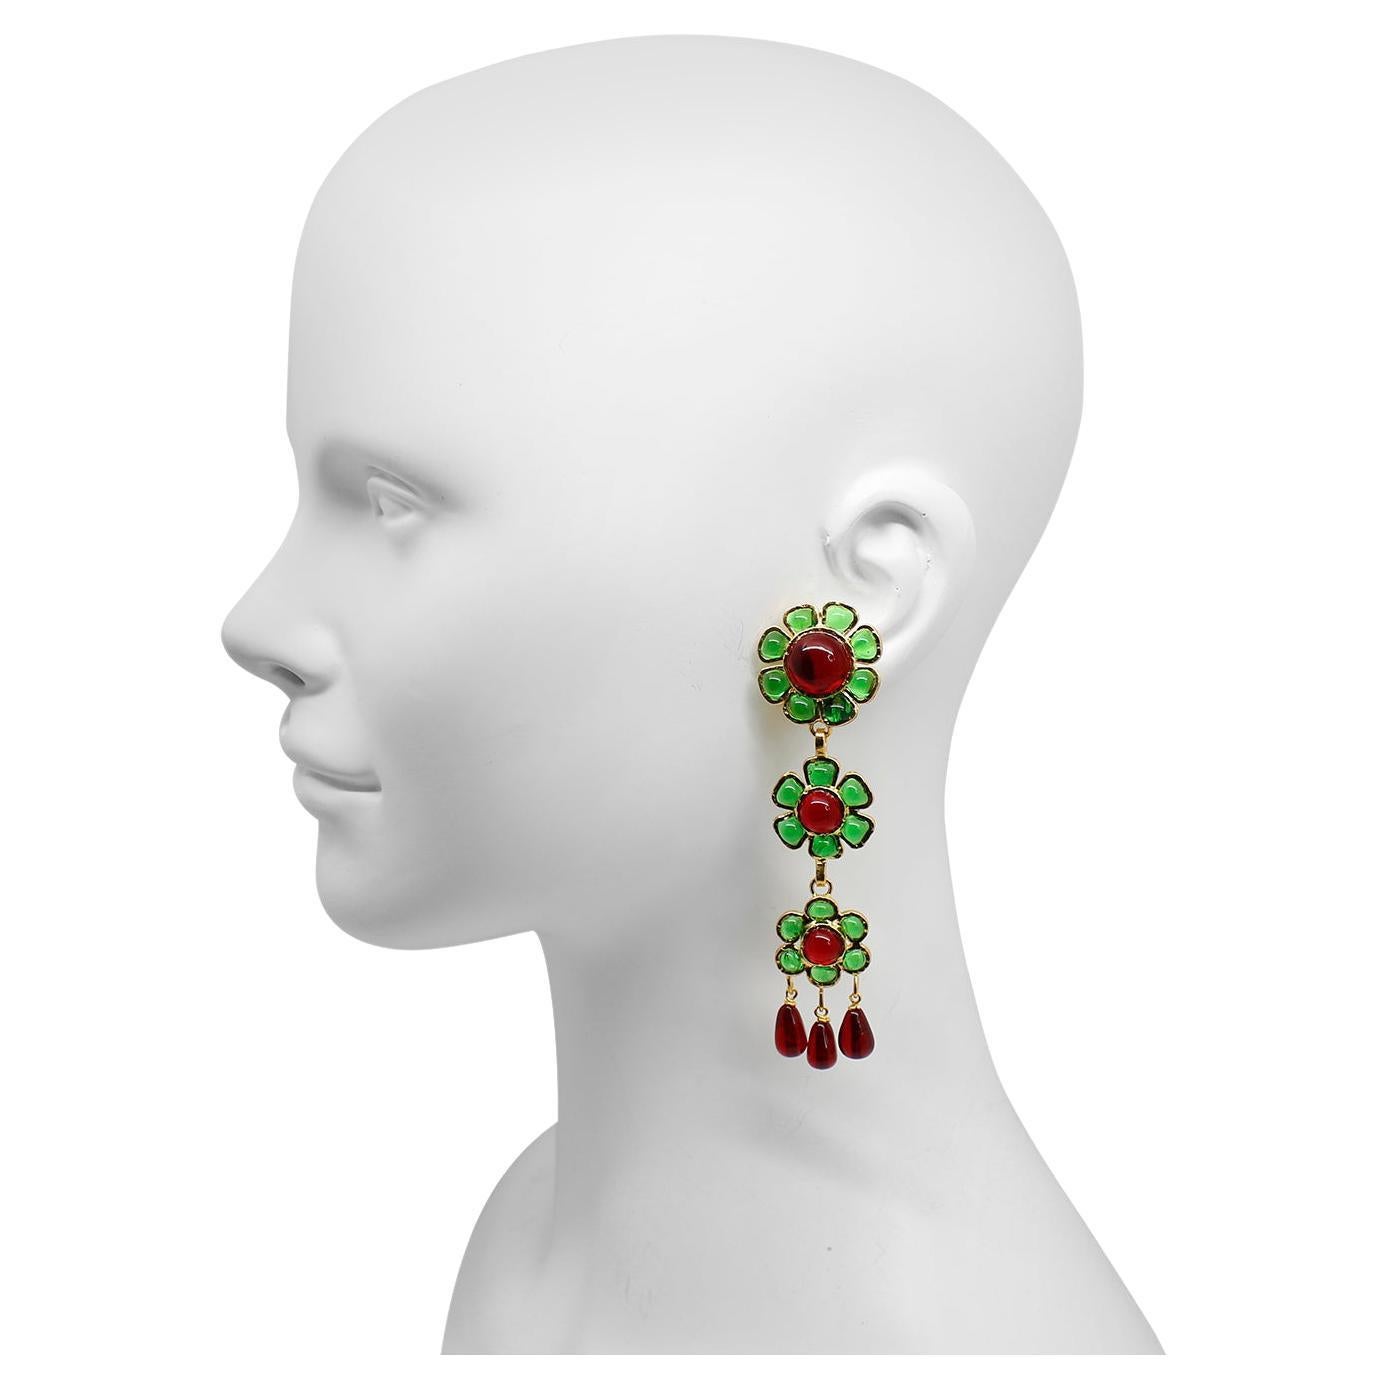 Maison Gripoix Vintage Red and Green Flower Dangling Earrings Set in Gold Tone.  These are some of the most gorgeous earrings I have in the collection. The colors of course and the way they are made.  They are just special.  They will always be